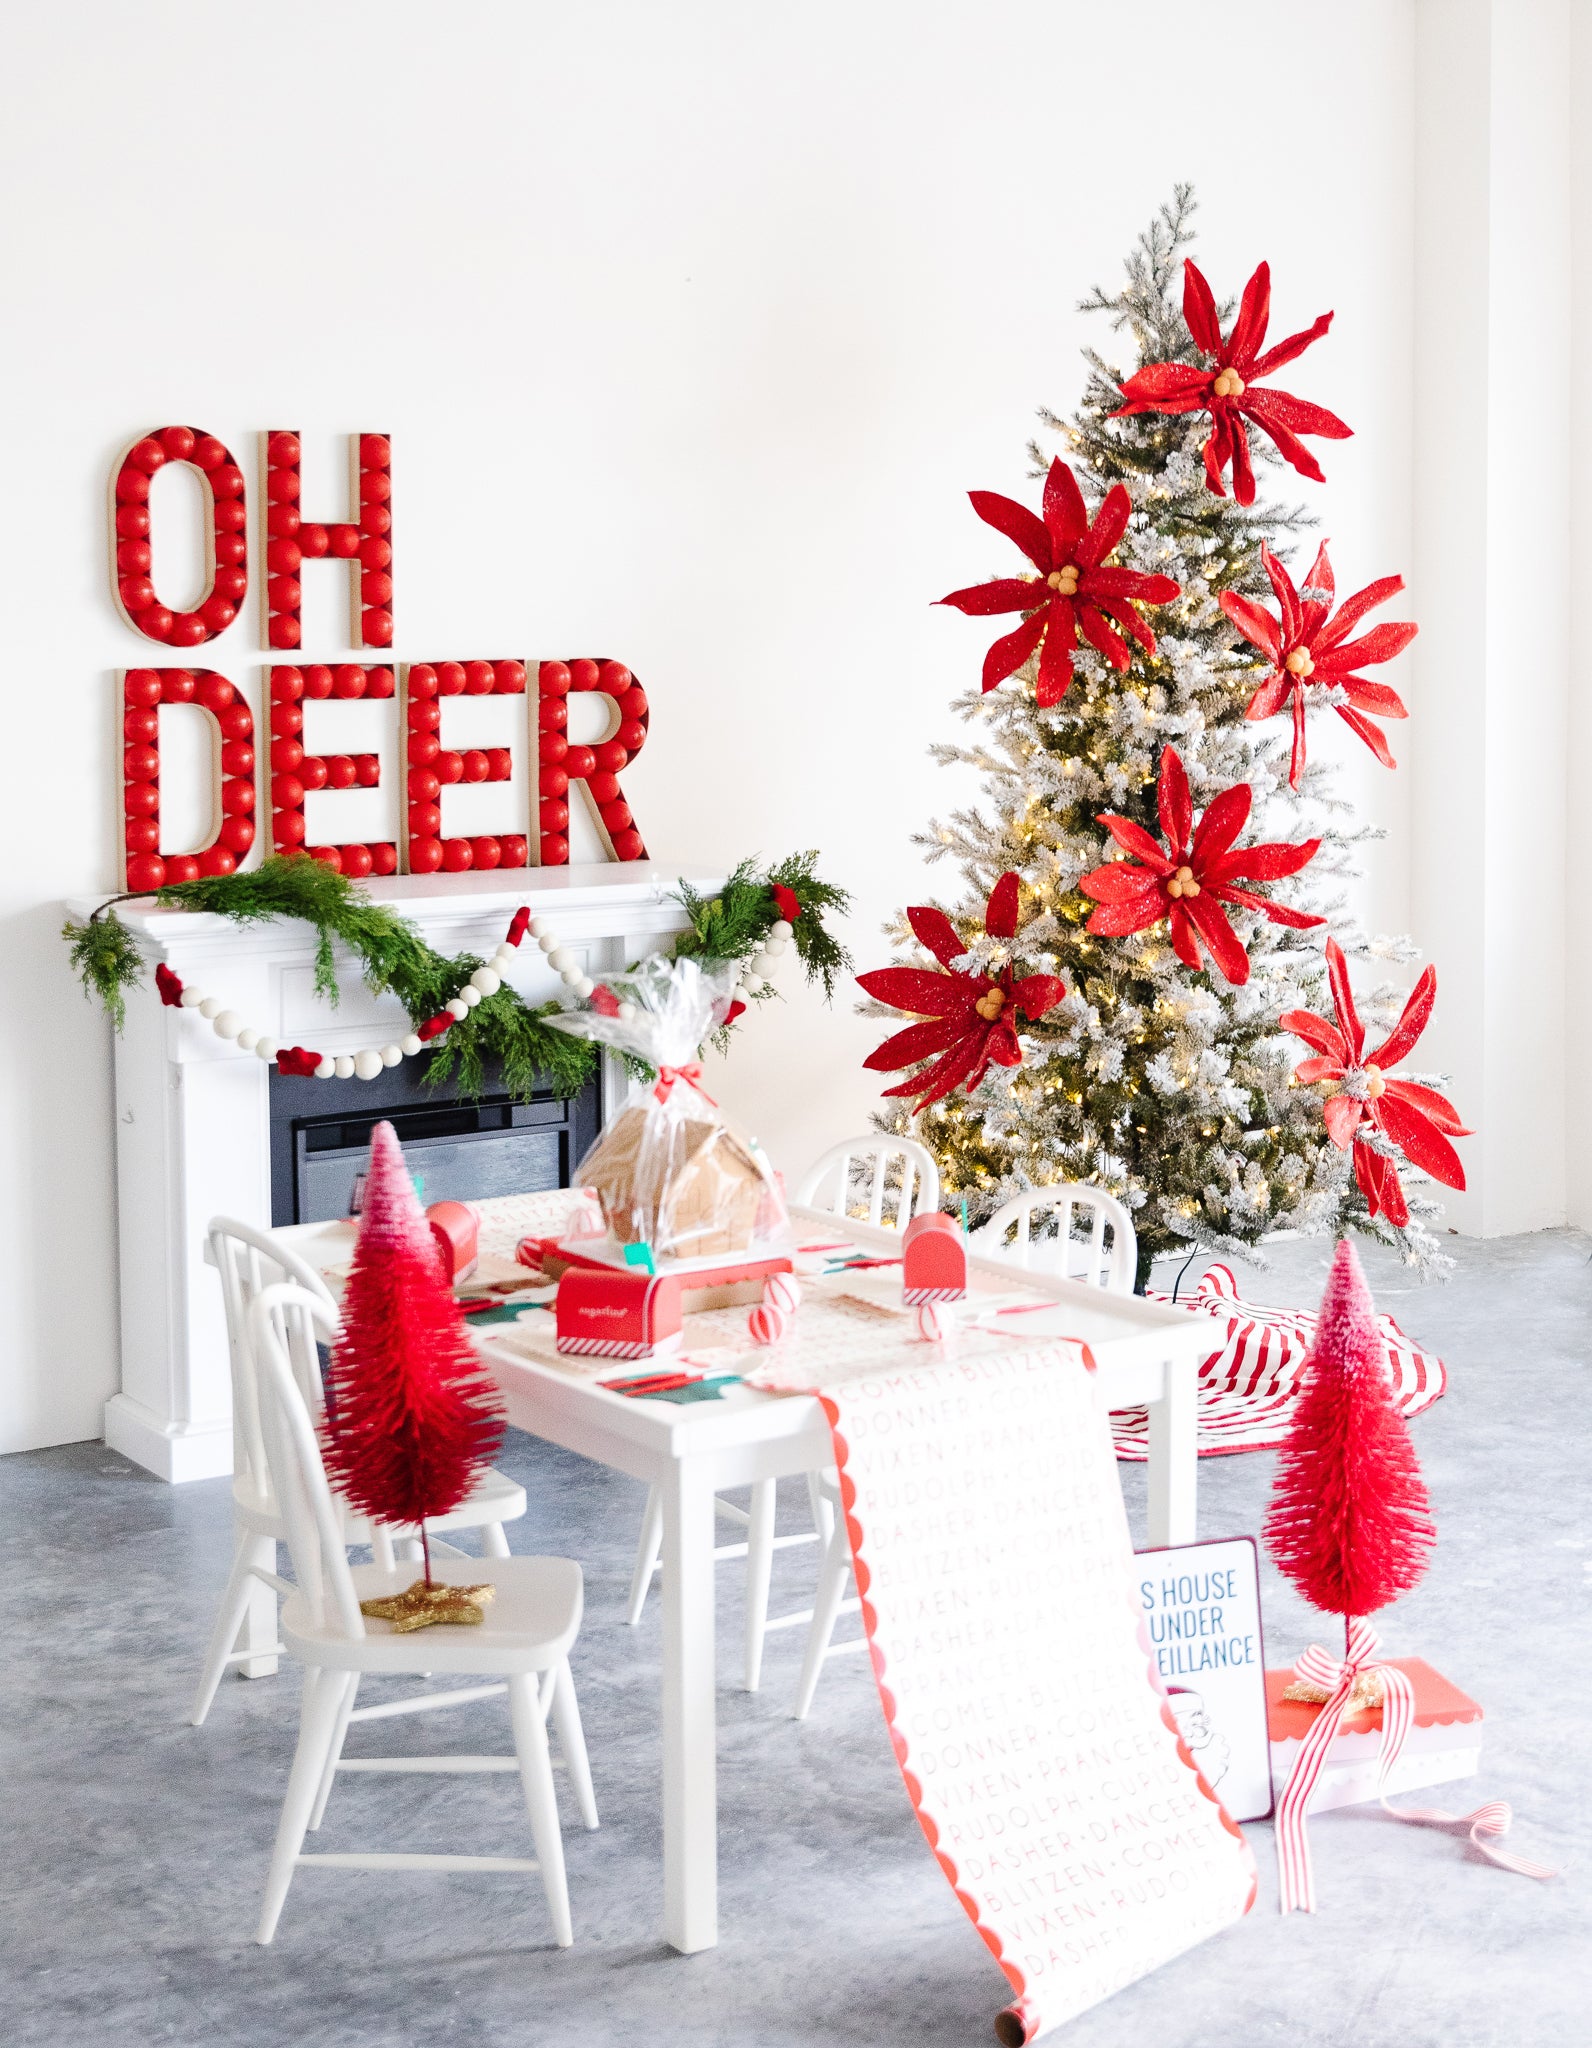 Red themed Christmas party ideas